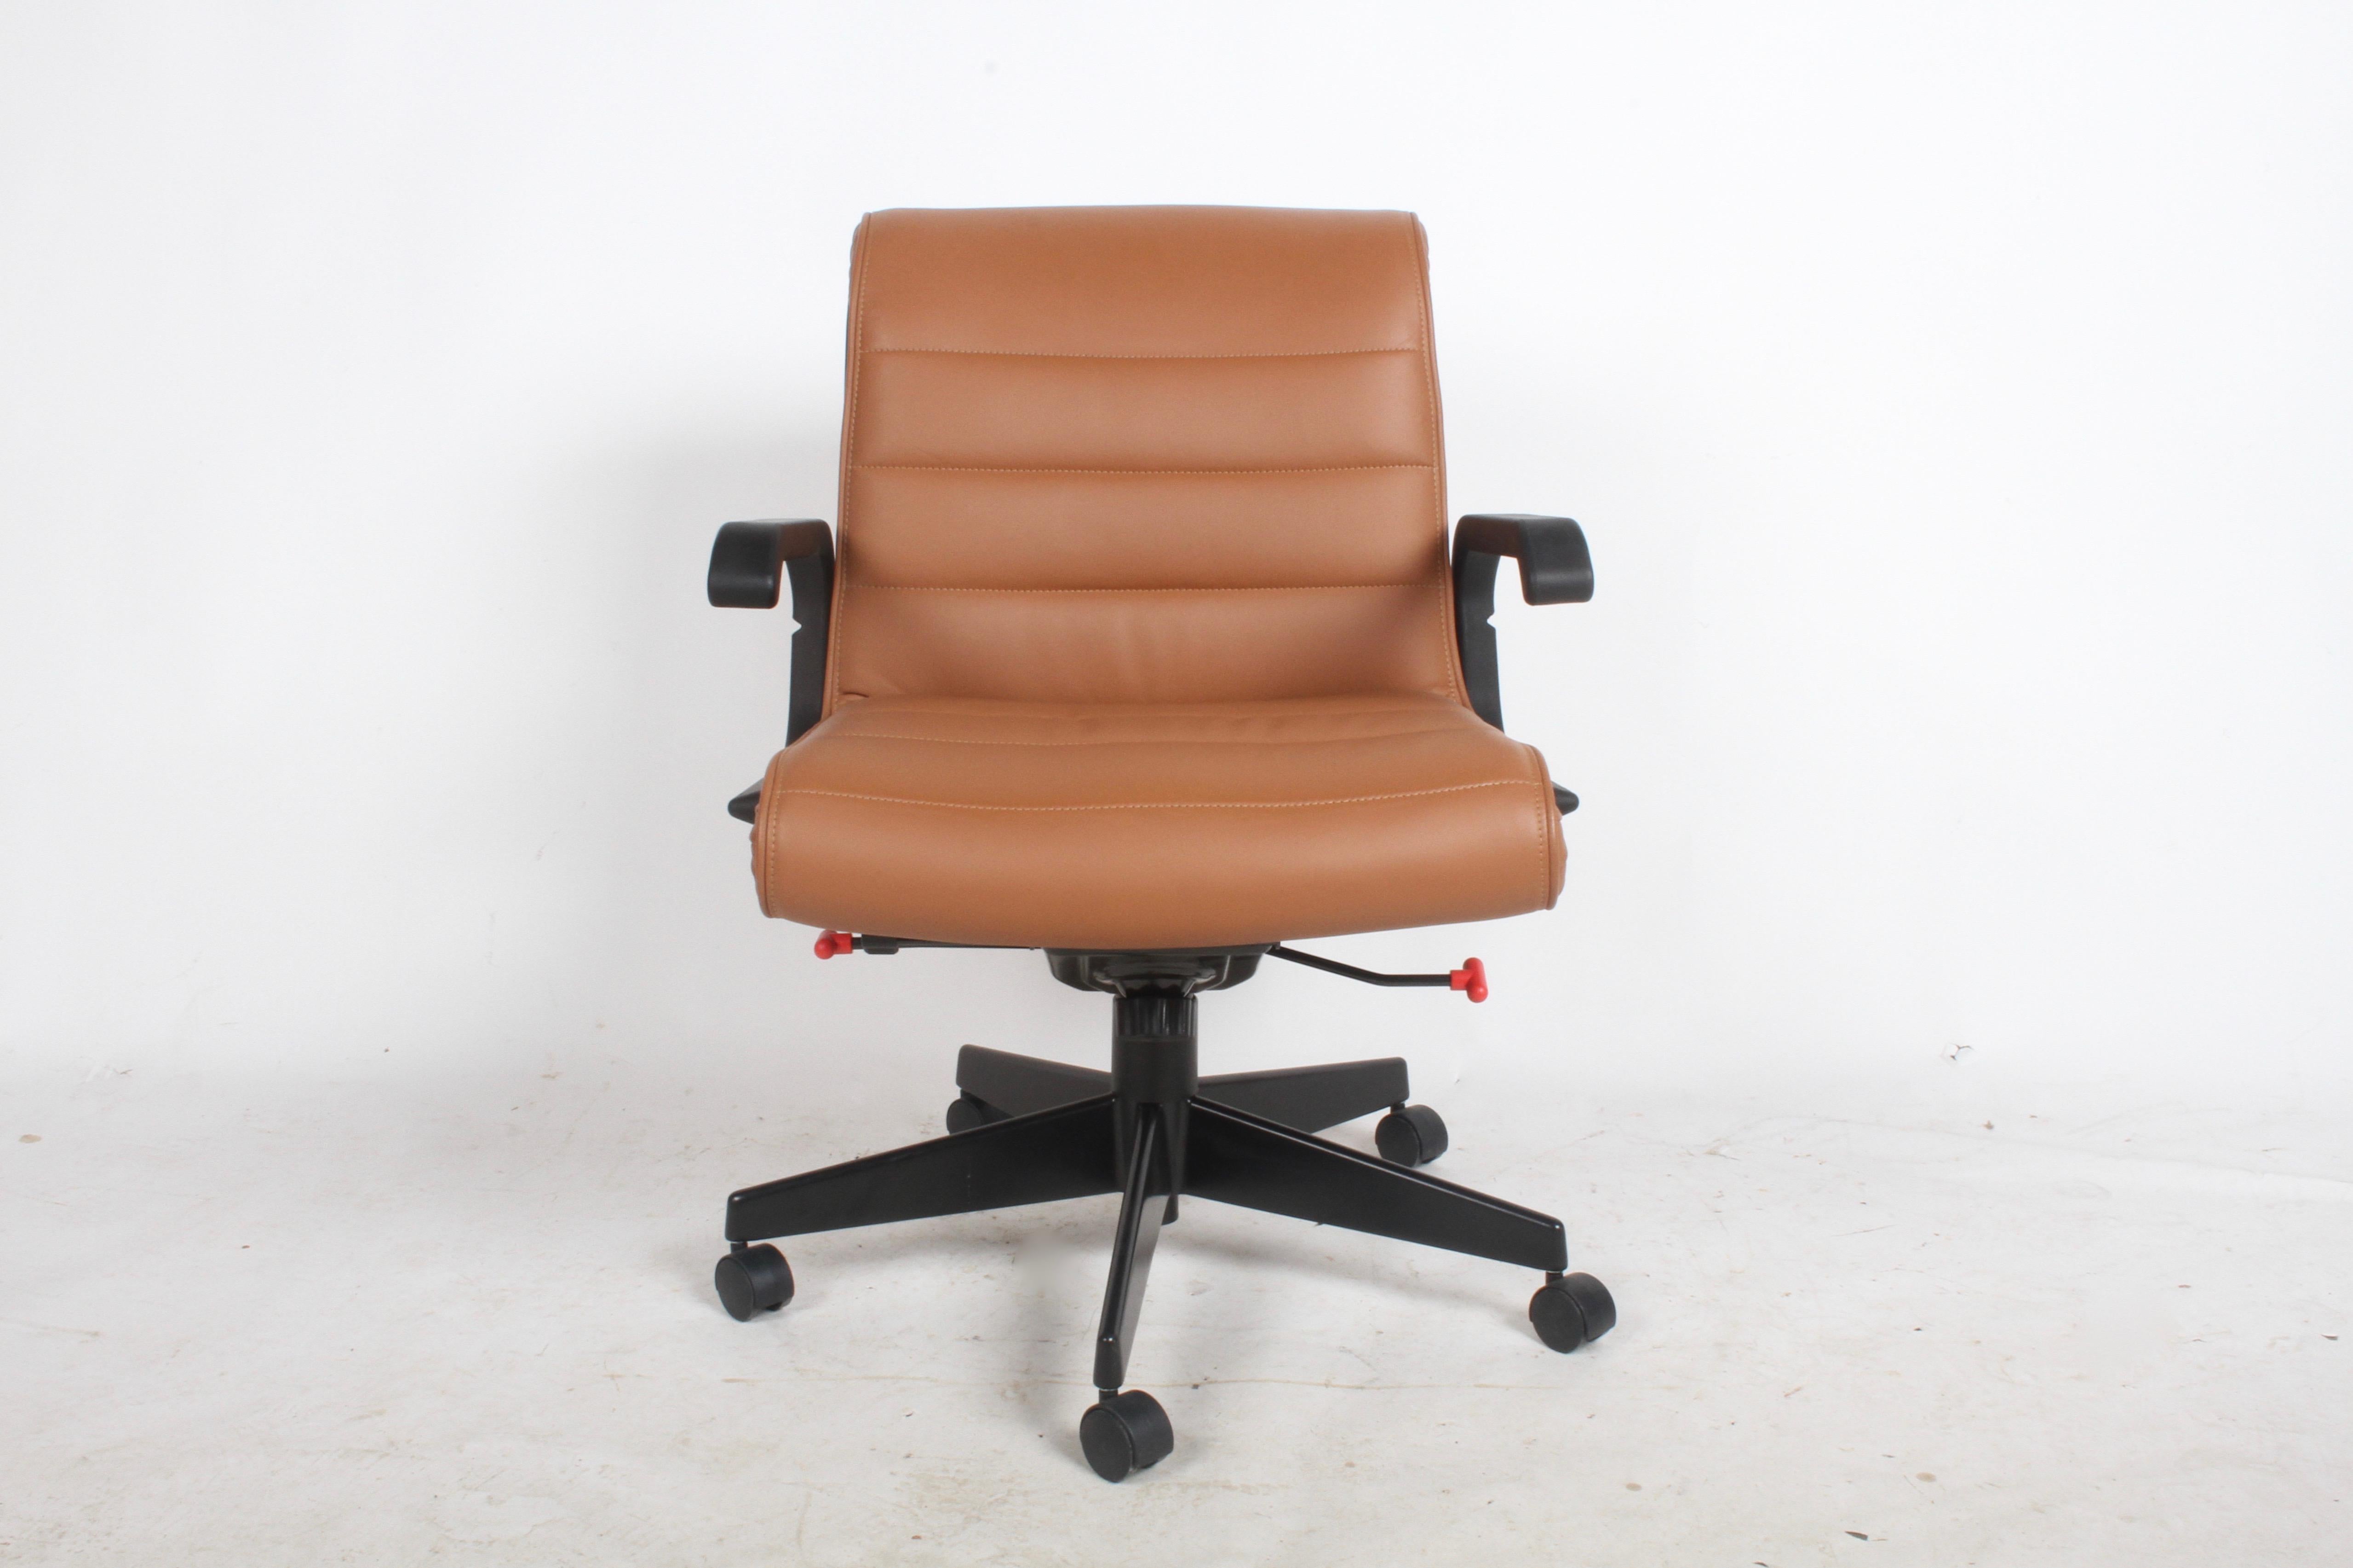 Designer Richard Sapper for Knoll the desk chairs in tan Spinneybeck leather, fully adjustable on 5 star bases on casters. Production in the mid 2000s, this chair is no longer in production. Over in nice used condition, condition varies on each